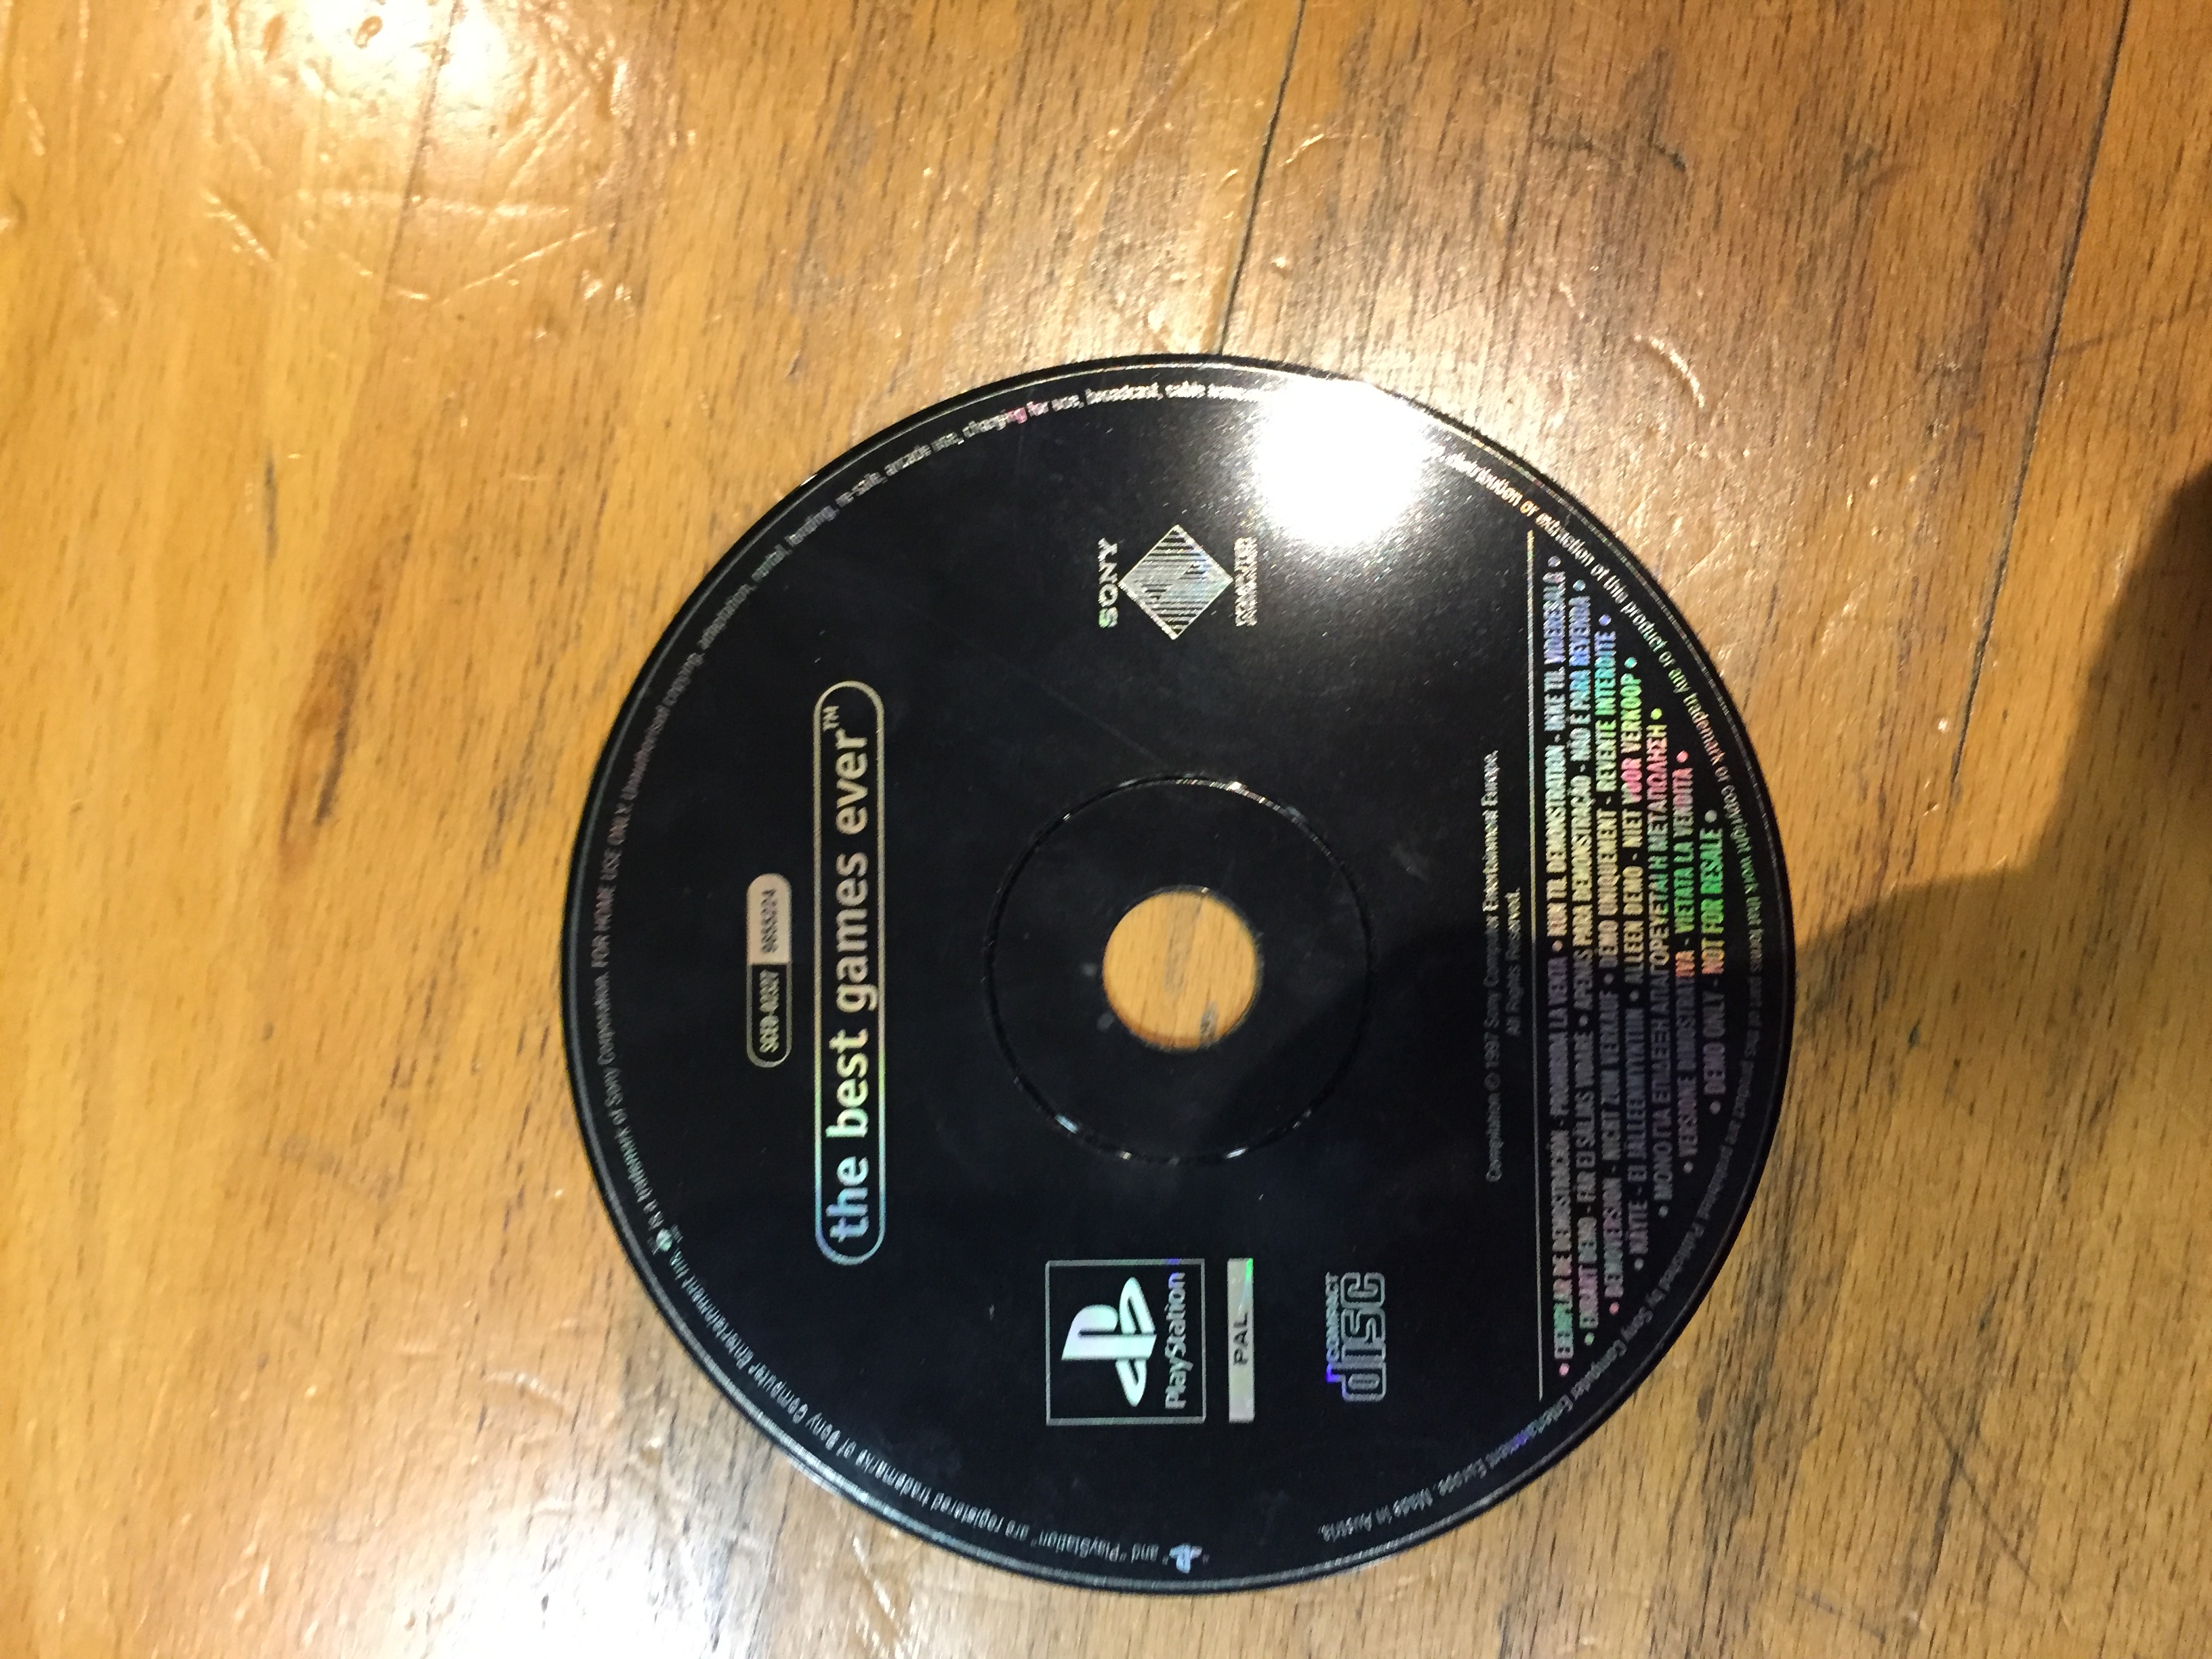 The Best Games Ever CD - PAL